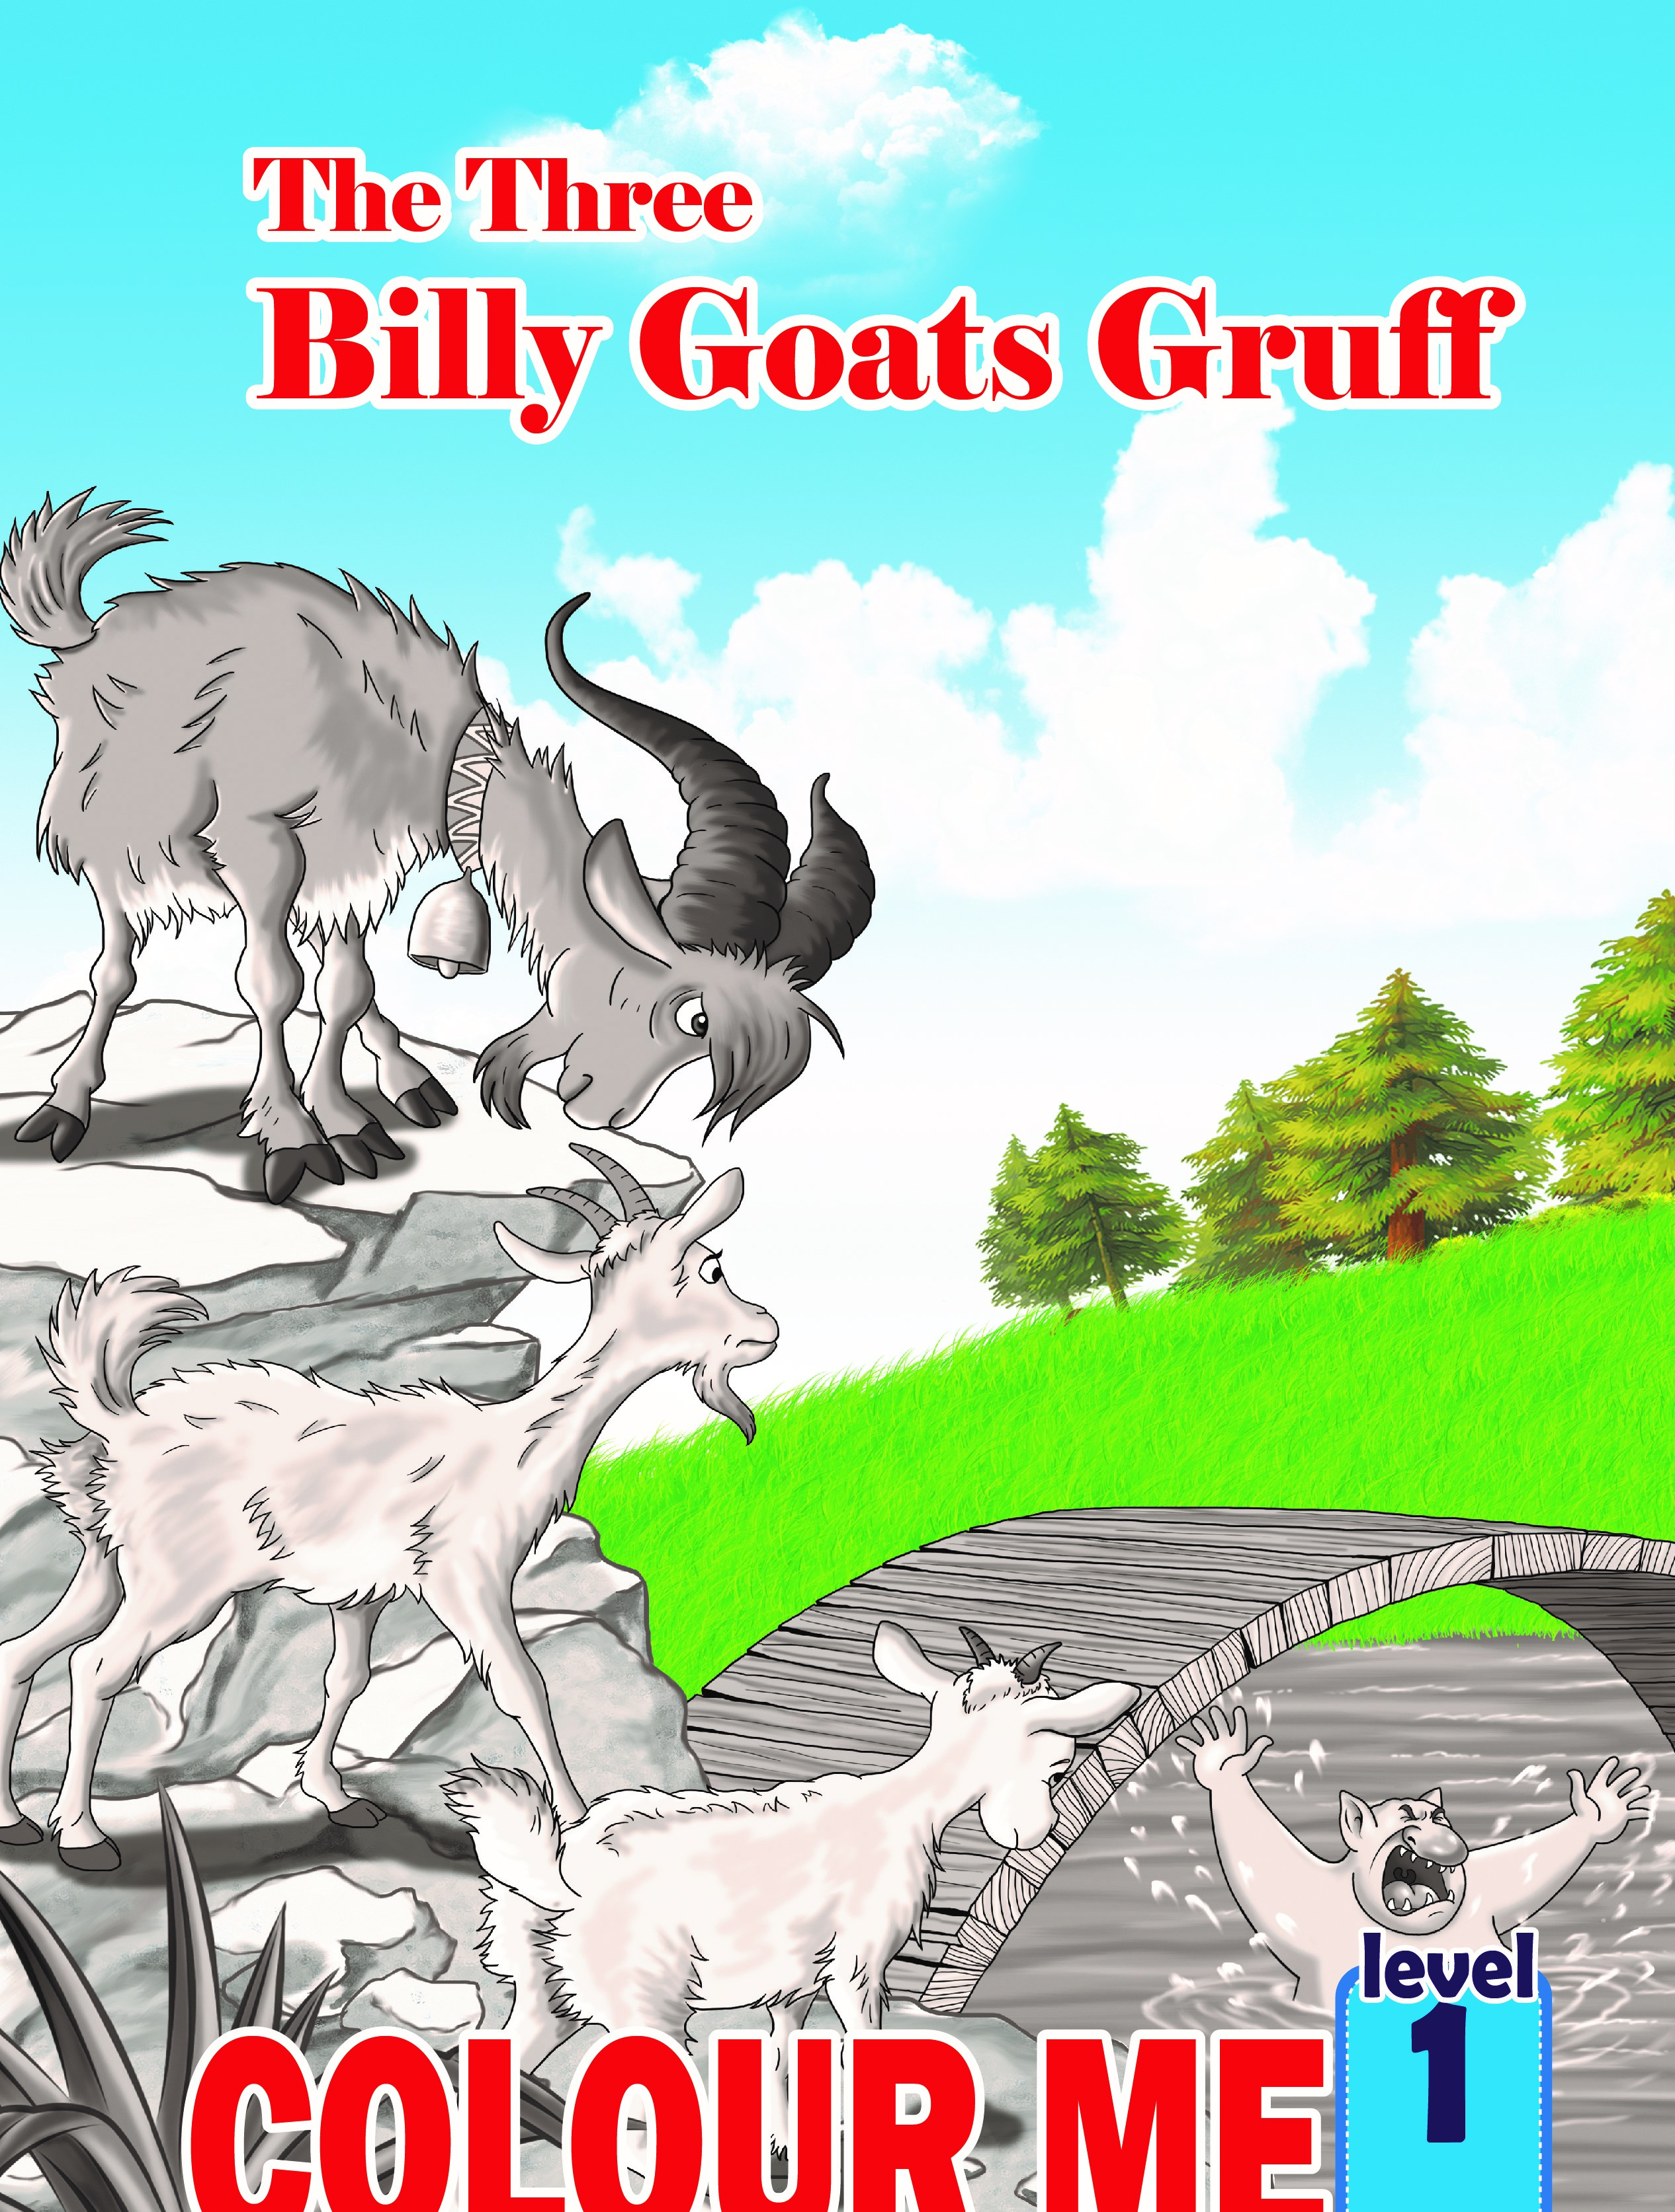 The Three Billy Goats Gruff  Colour ME     